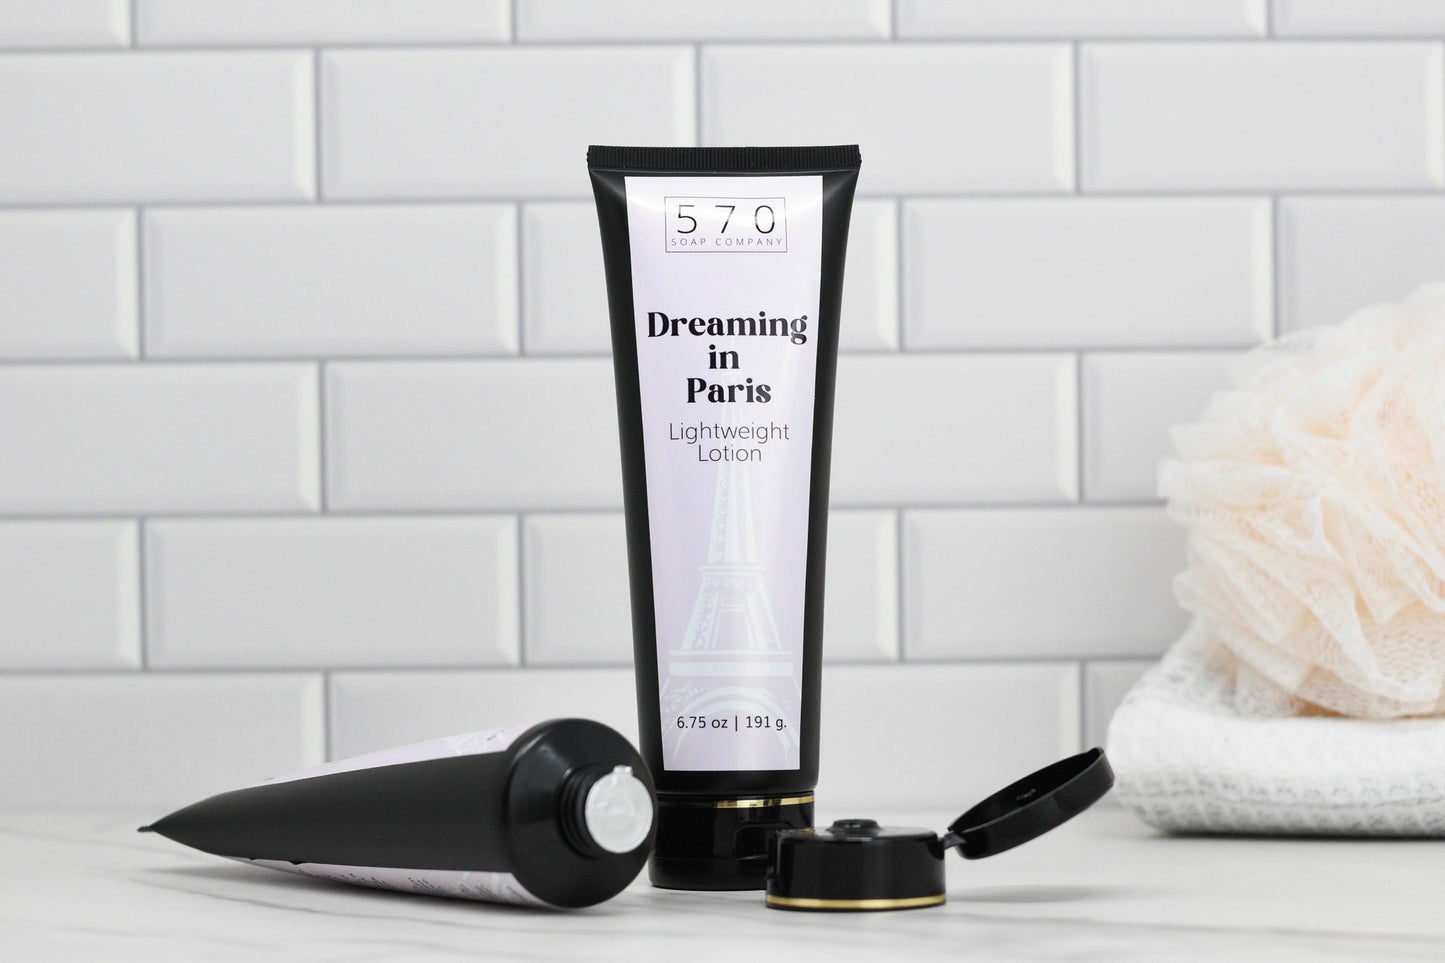 Dreaming in Paris Lightweight Lotion